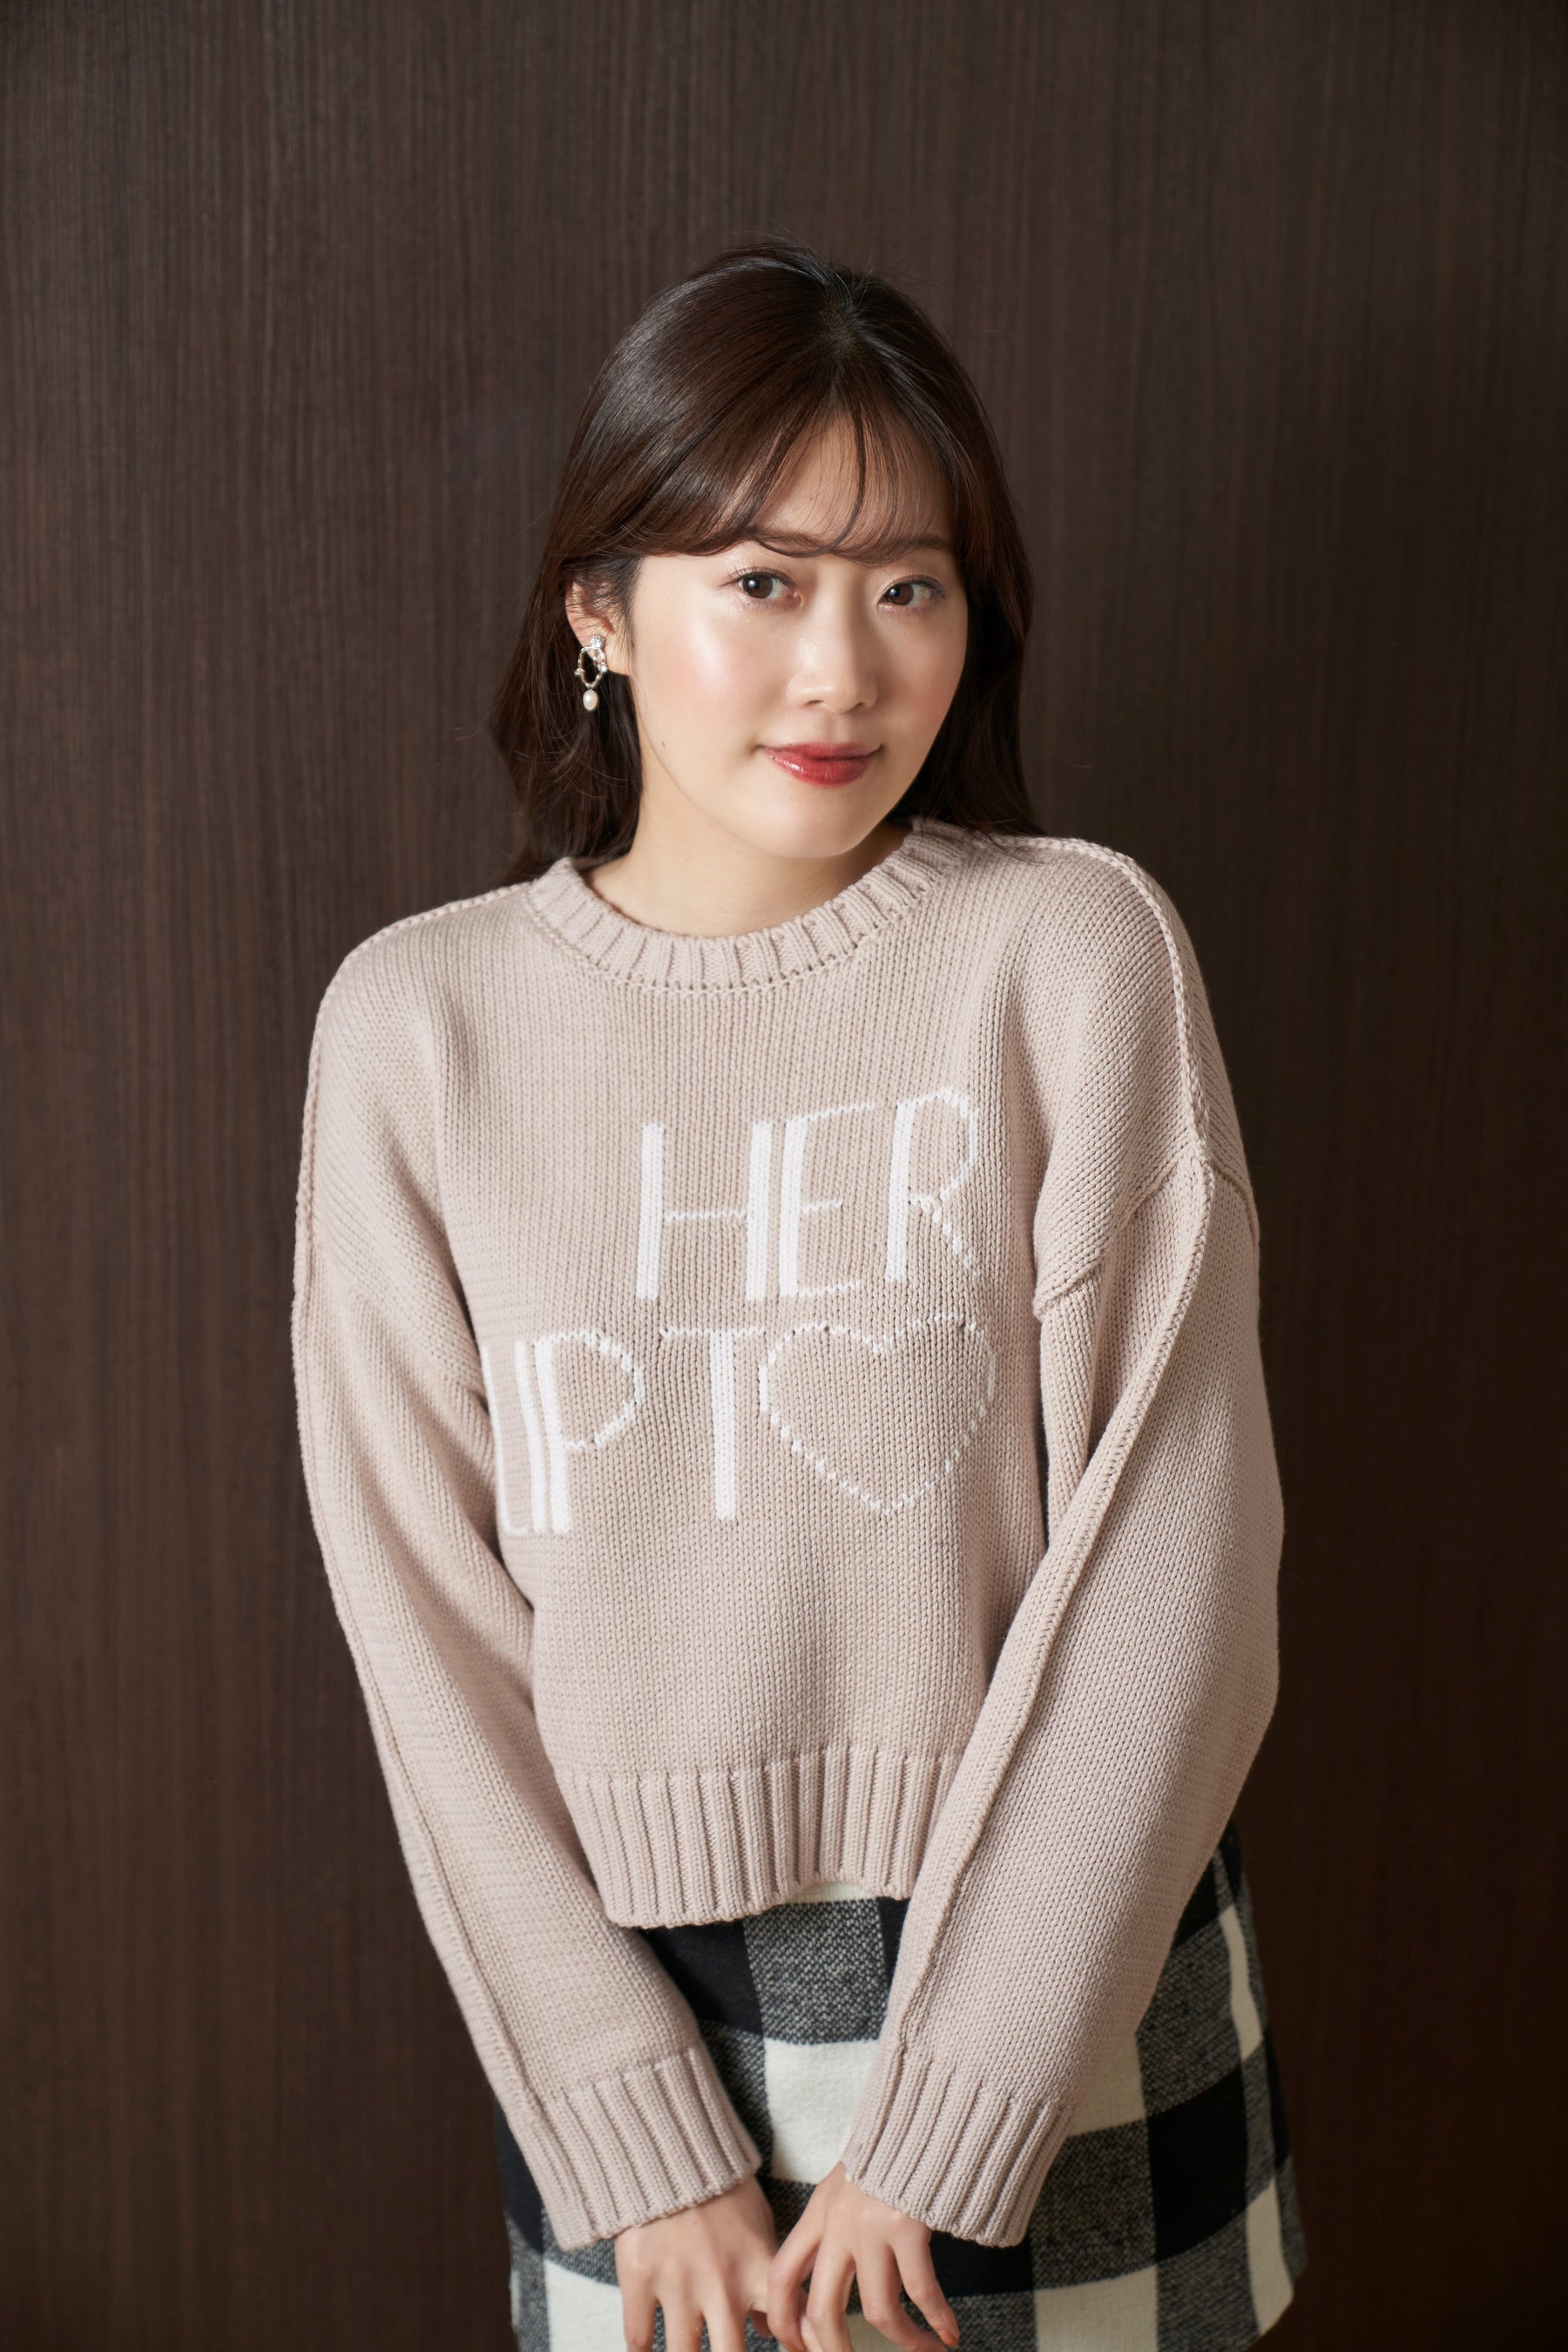 Share The Love Knit Top色ネイビーnavy